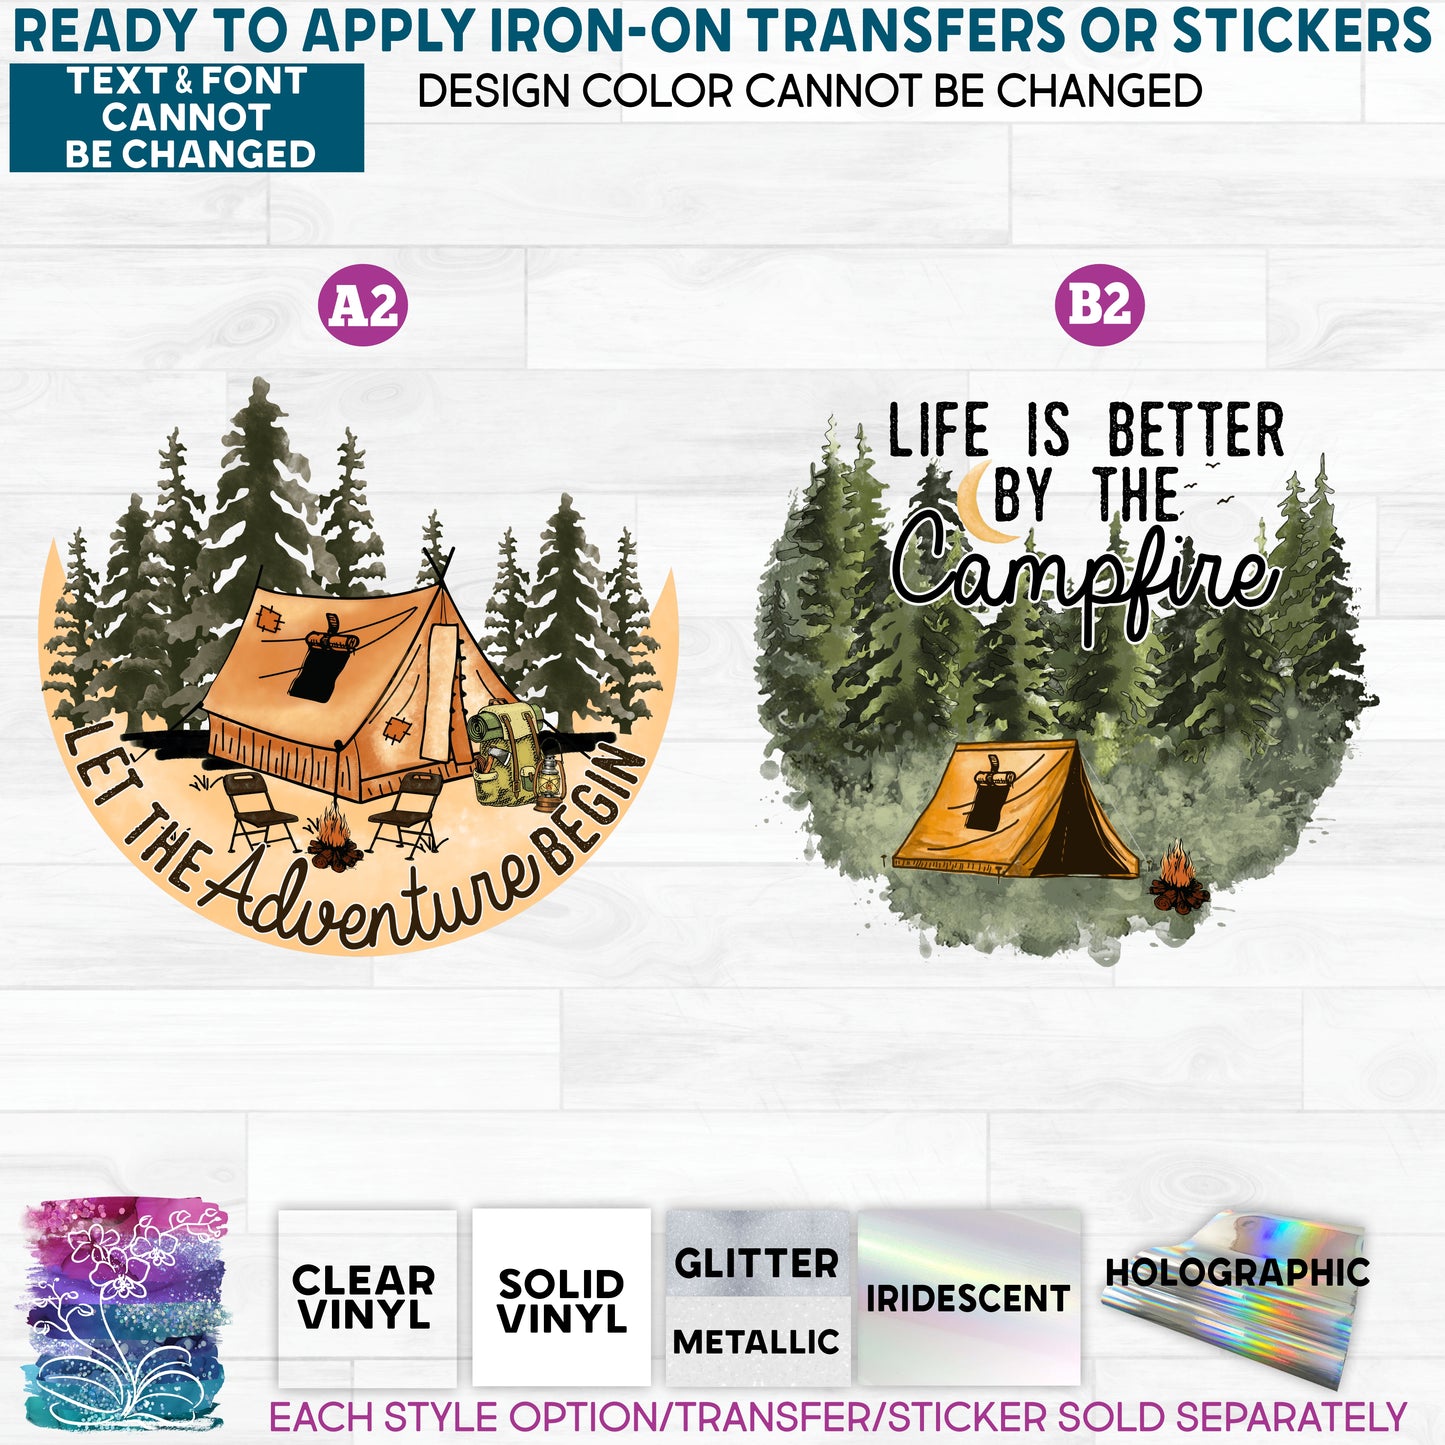 (s228-10) Let the Adventure Begin, Life is Better by the Campfire Glitter or Vinyl Iron-On Transfer or Sticker